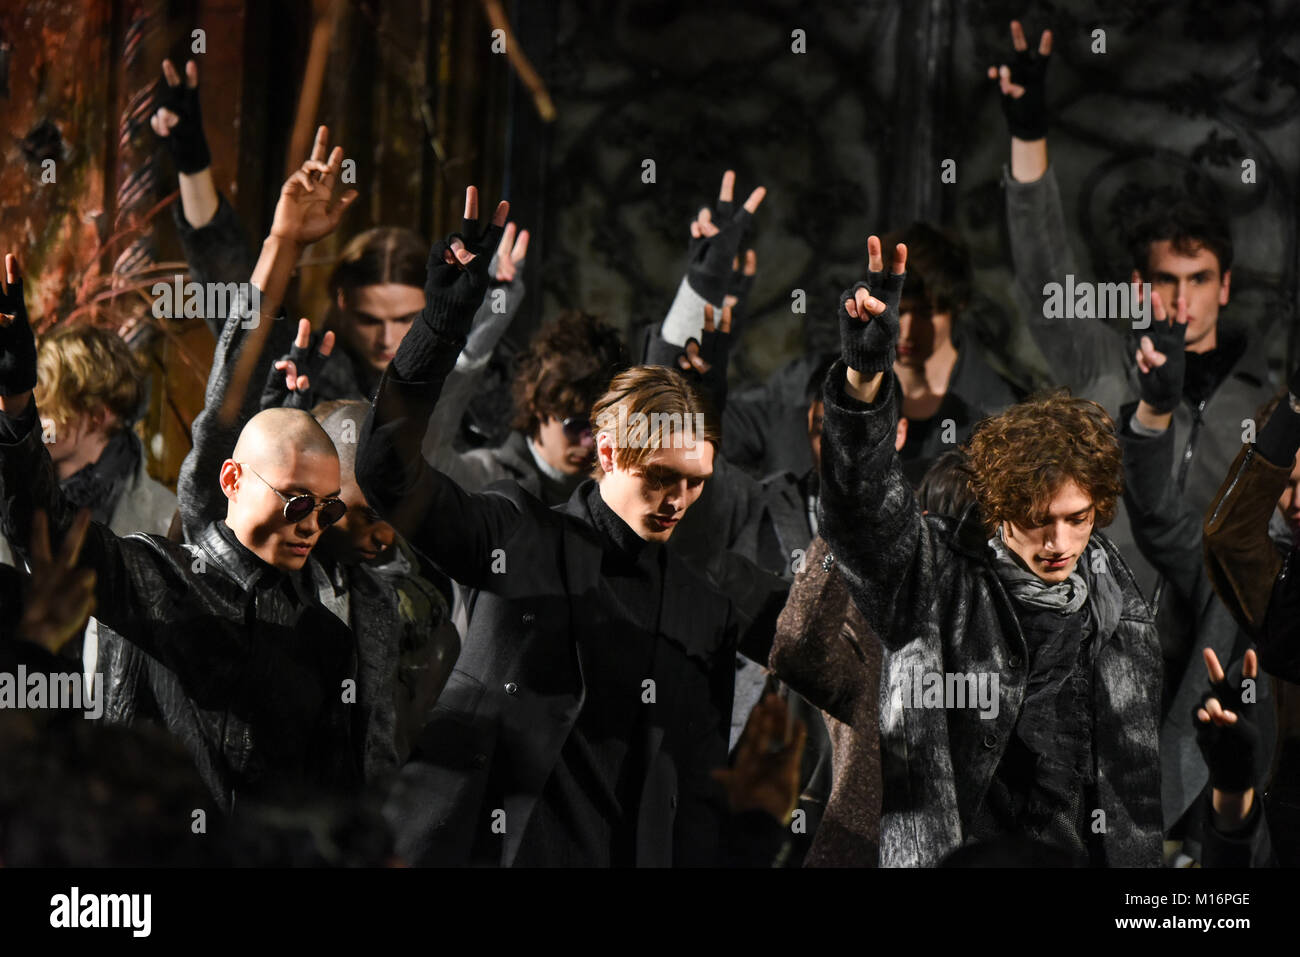 NEW YORK, NY - JANUARY 26: Designer and Models poses the runway wearing John Varvatos Fall/Winter 2018 showing peace signs at the Angel Orensanz Found Stock Photo